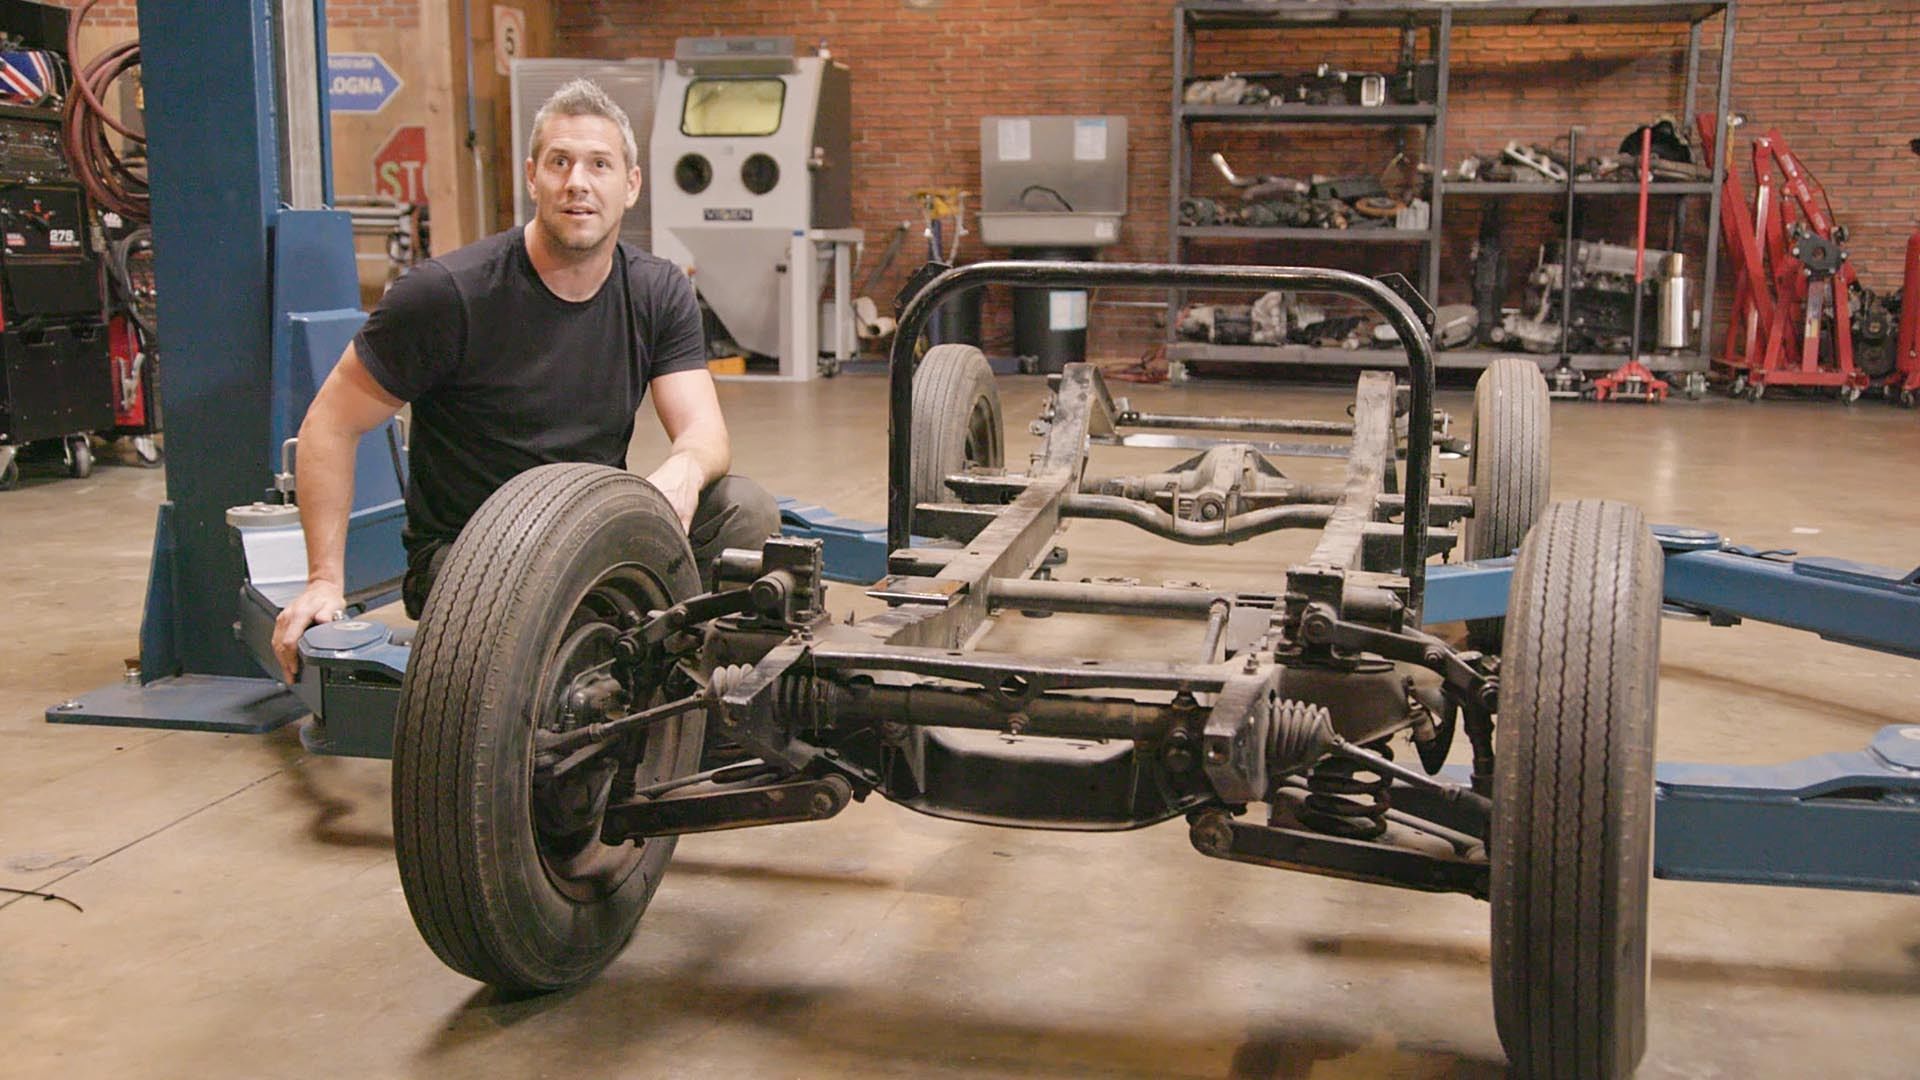 Ant Anstead is altering an MG chassis to make an Alfa recreation